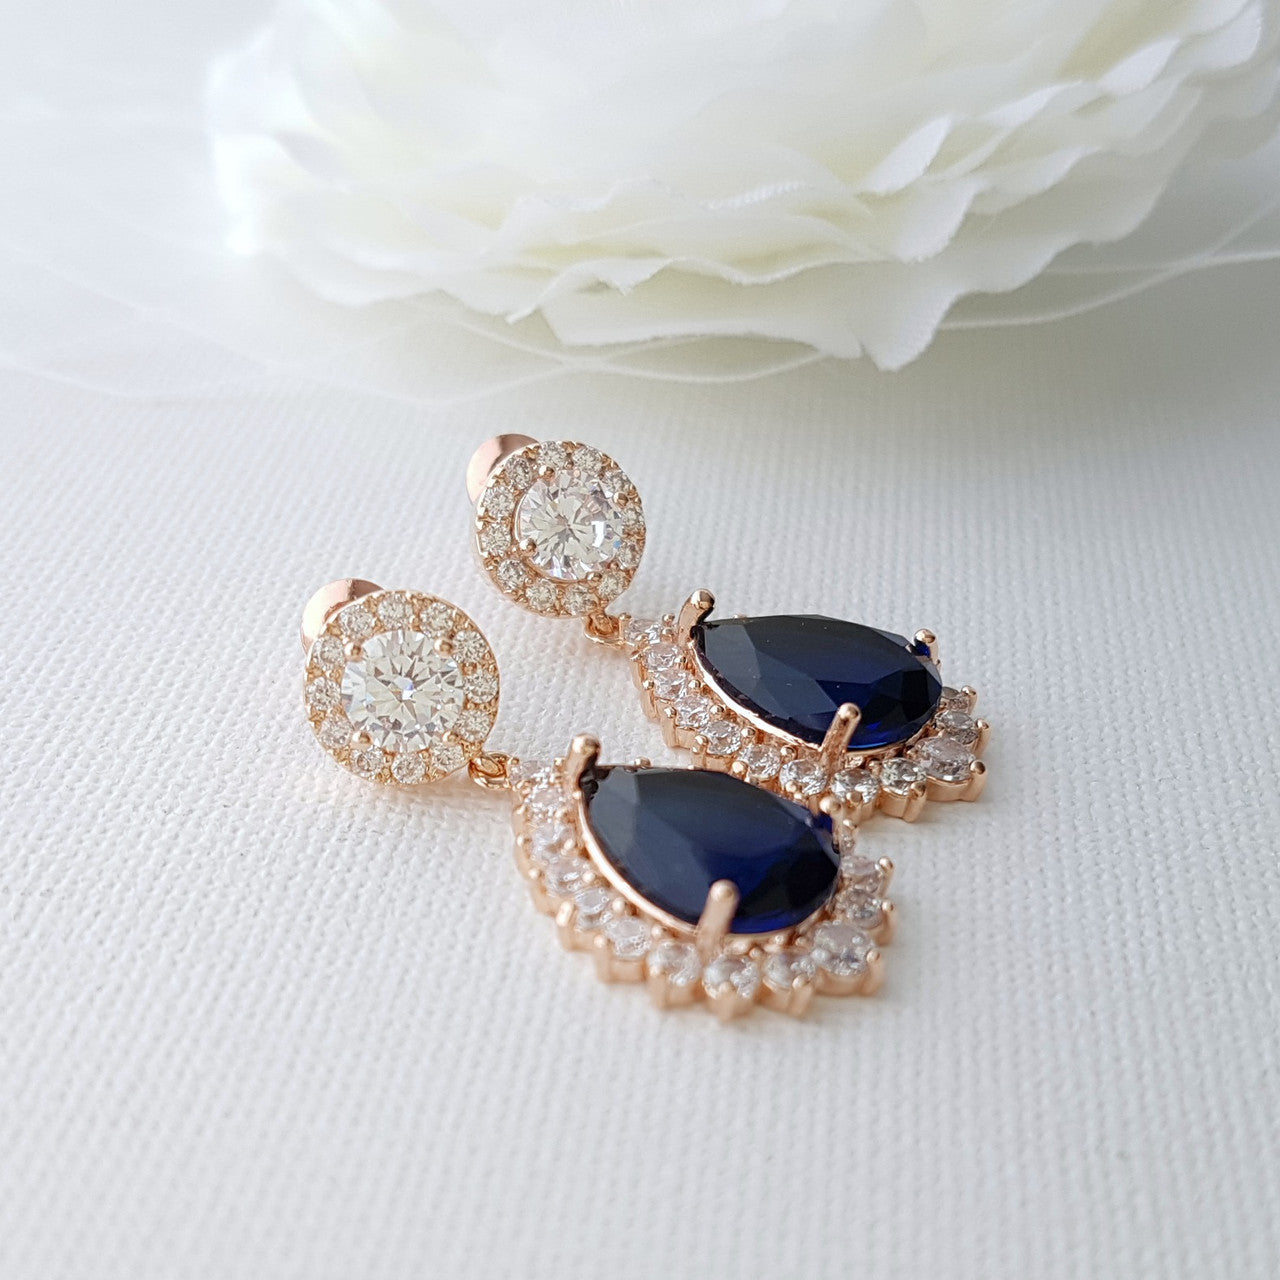 Blue and Gold Earrings Aoi